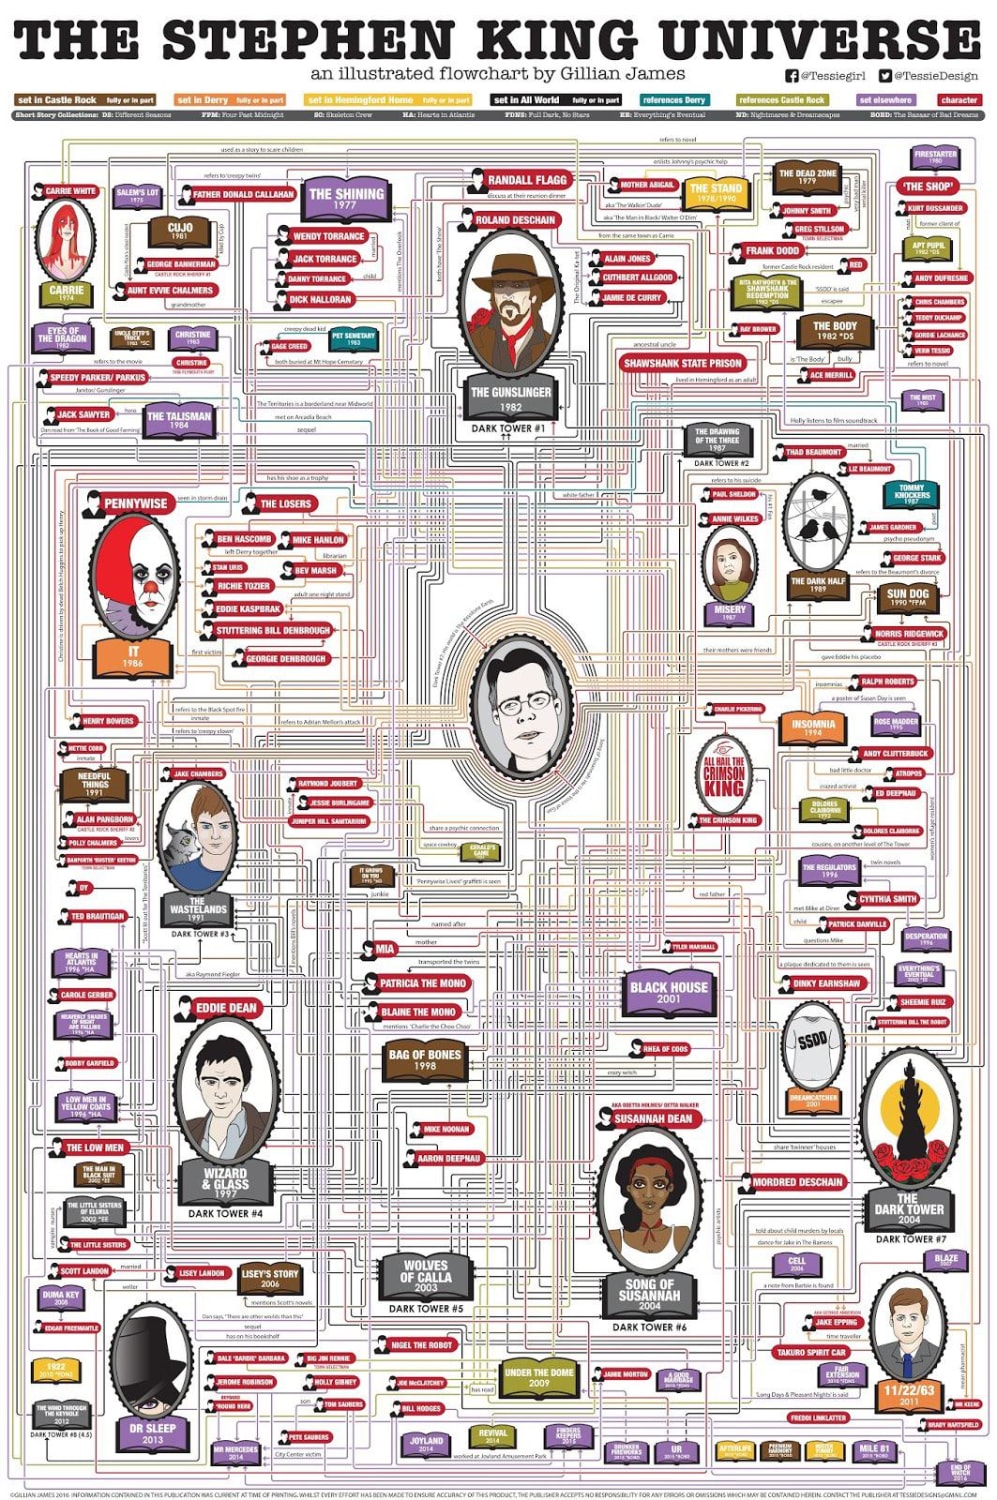 How the Stephen King universe is connected